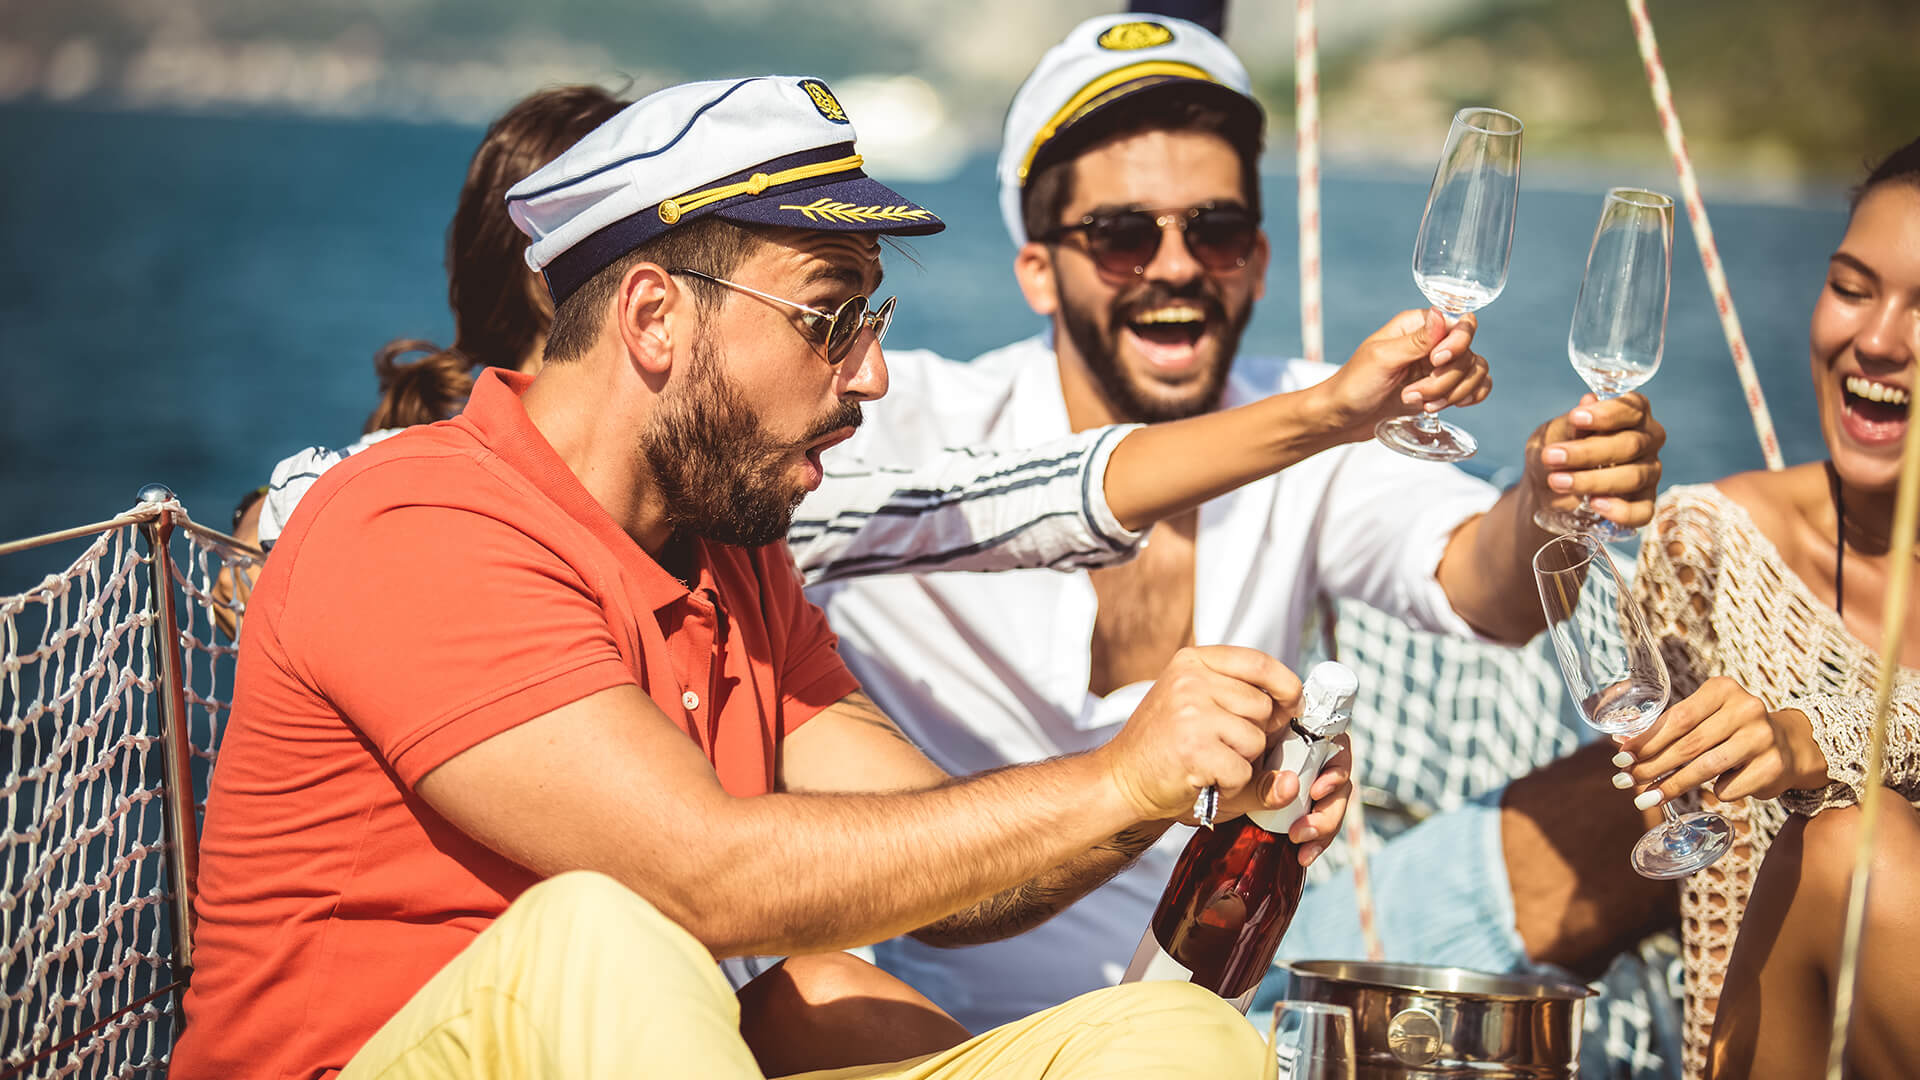 LUXlife's Guide To Planning An Unforgettable Yacht Party - LUXlife Magazine